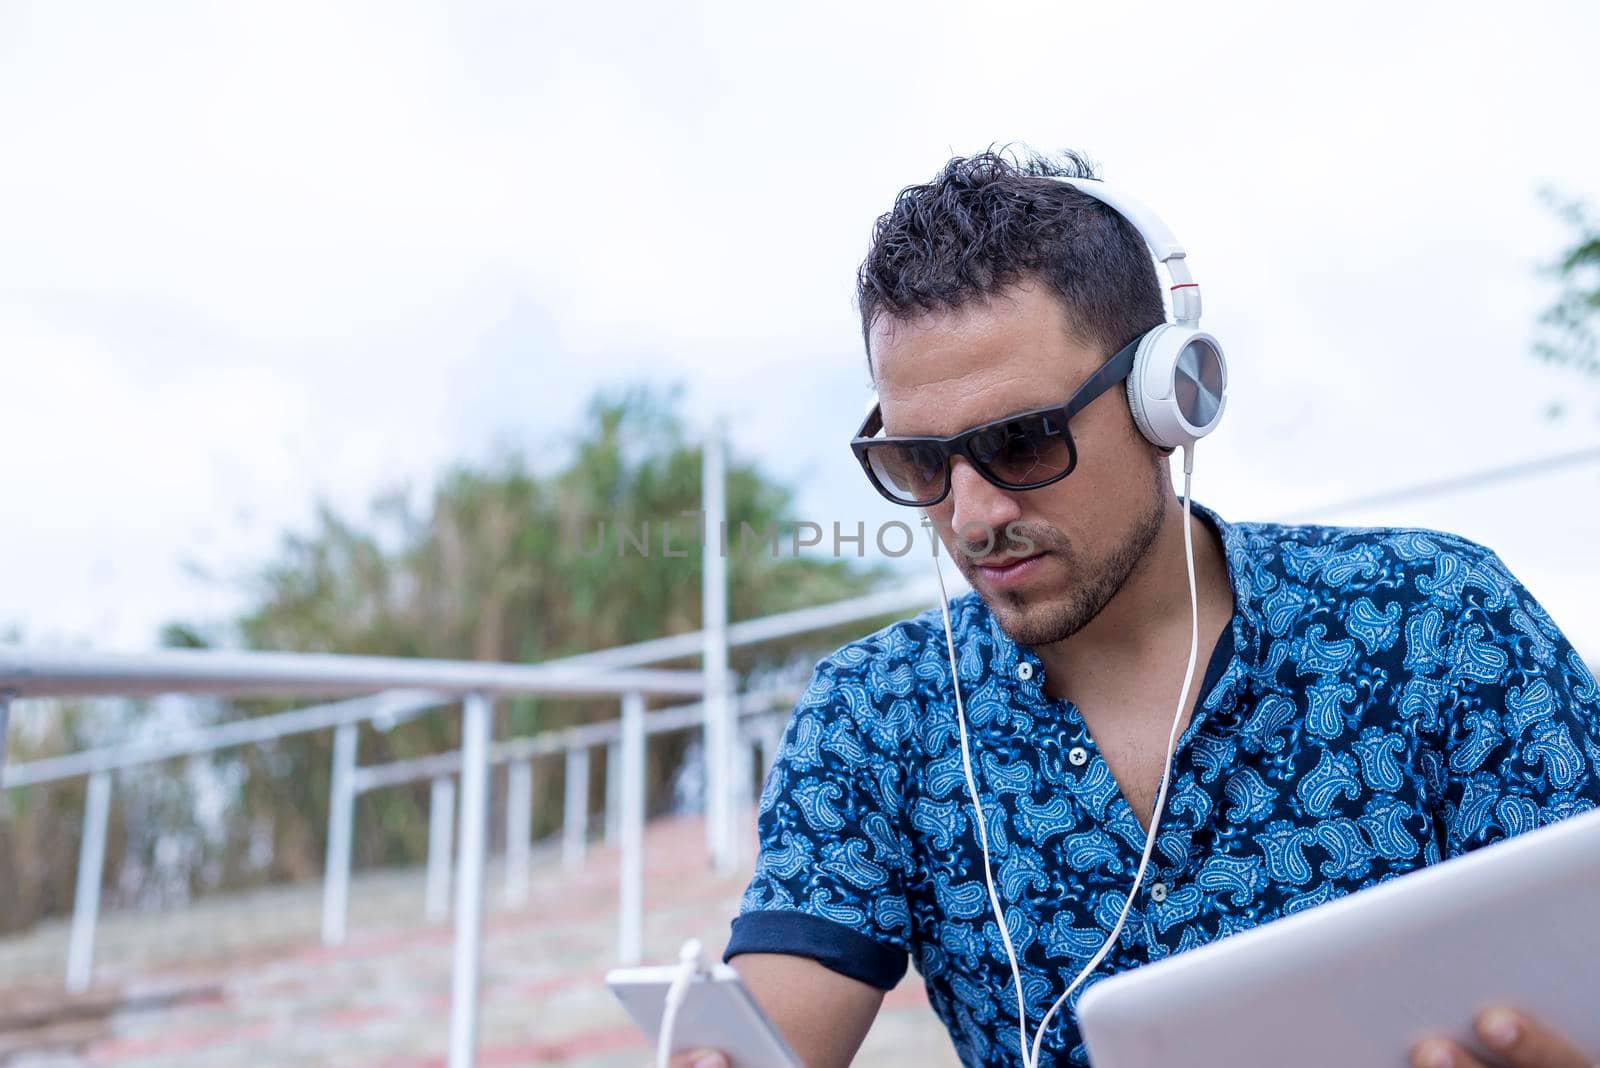 Young man with headphones and sunglasses sitting on stairs outdoors using tablet by raferto1973